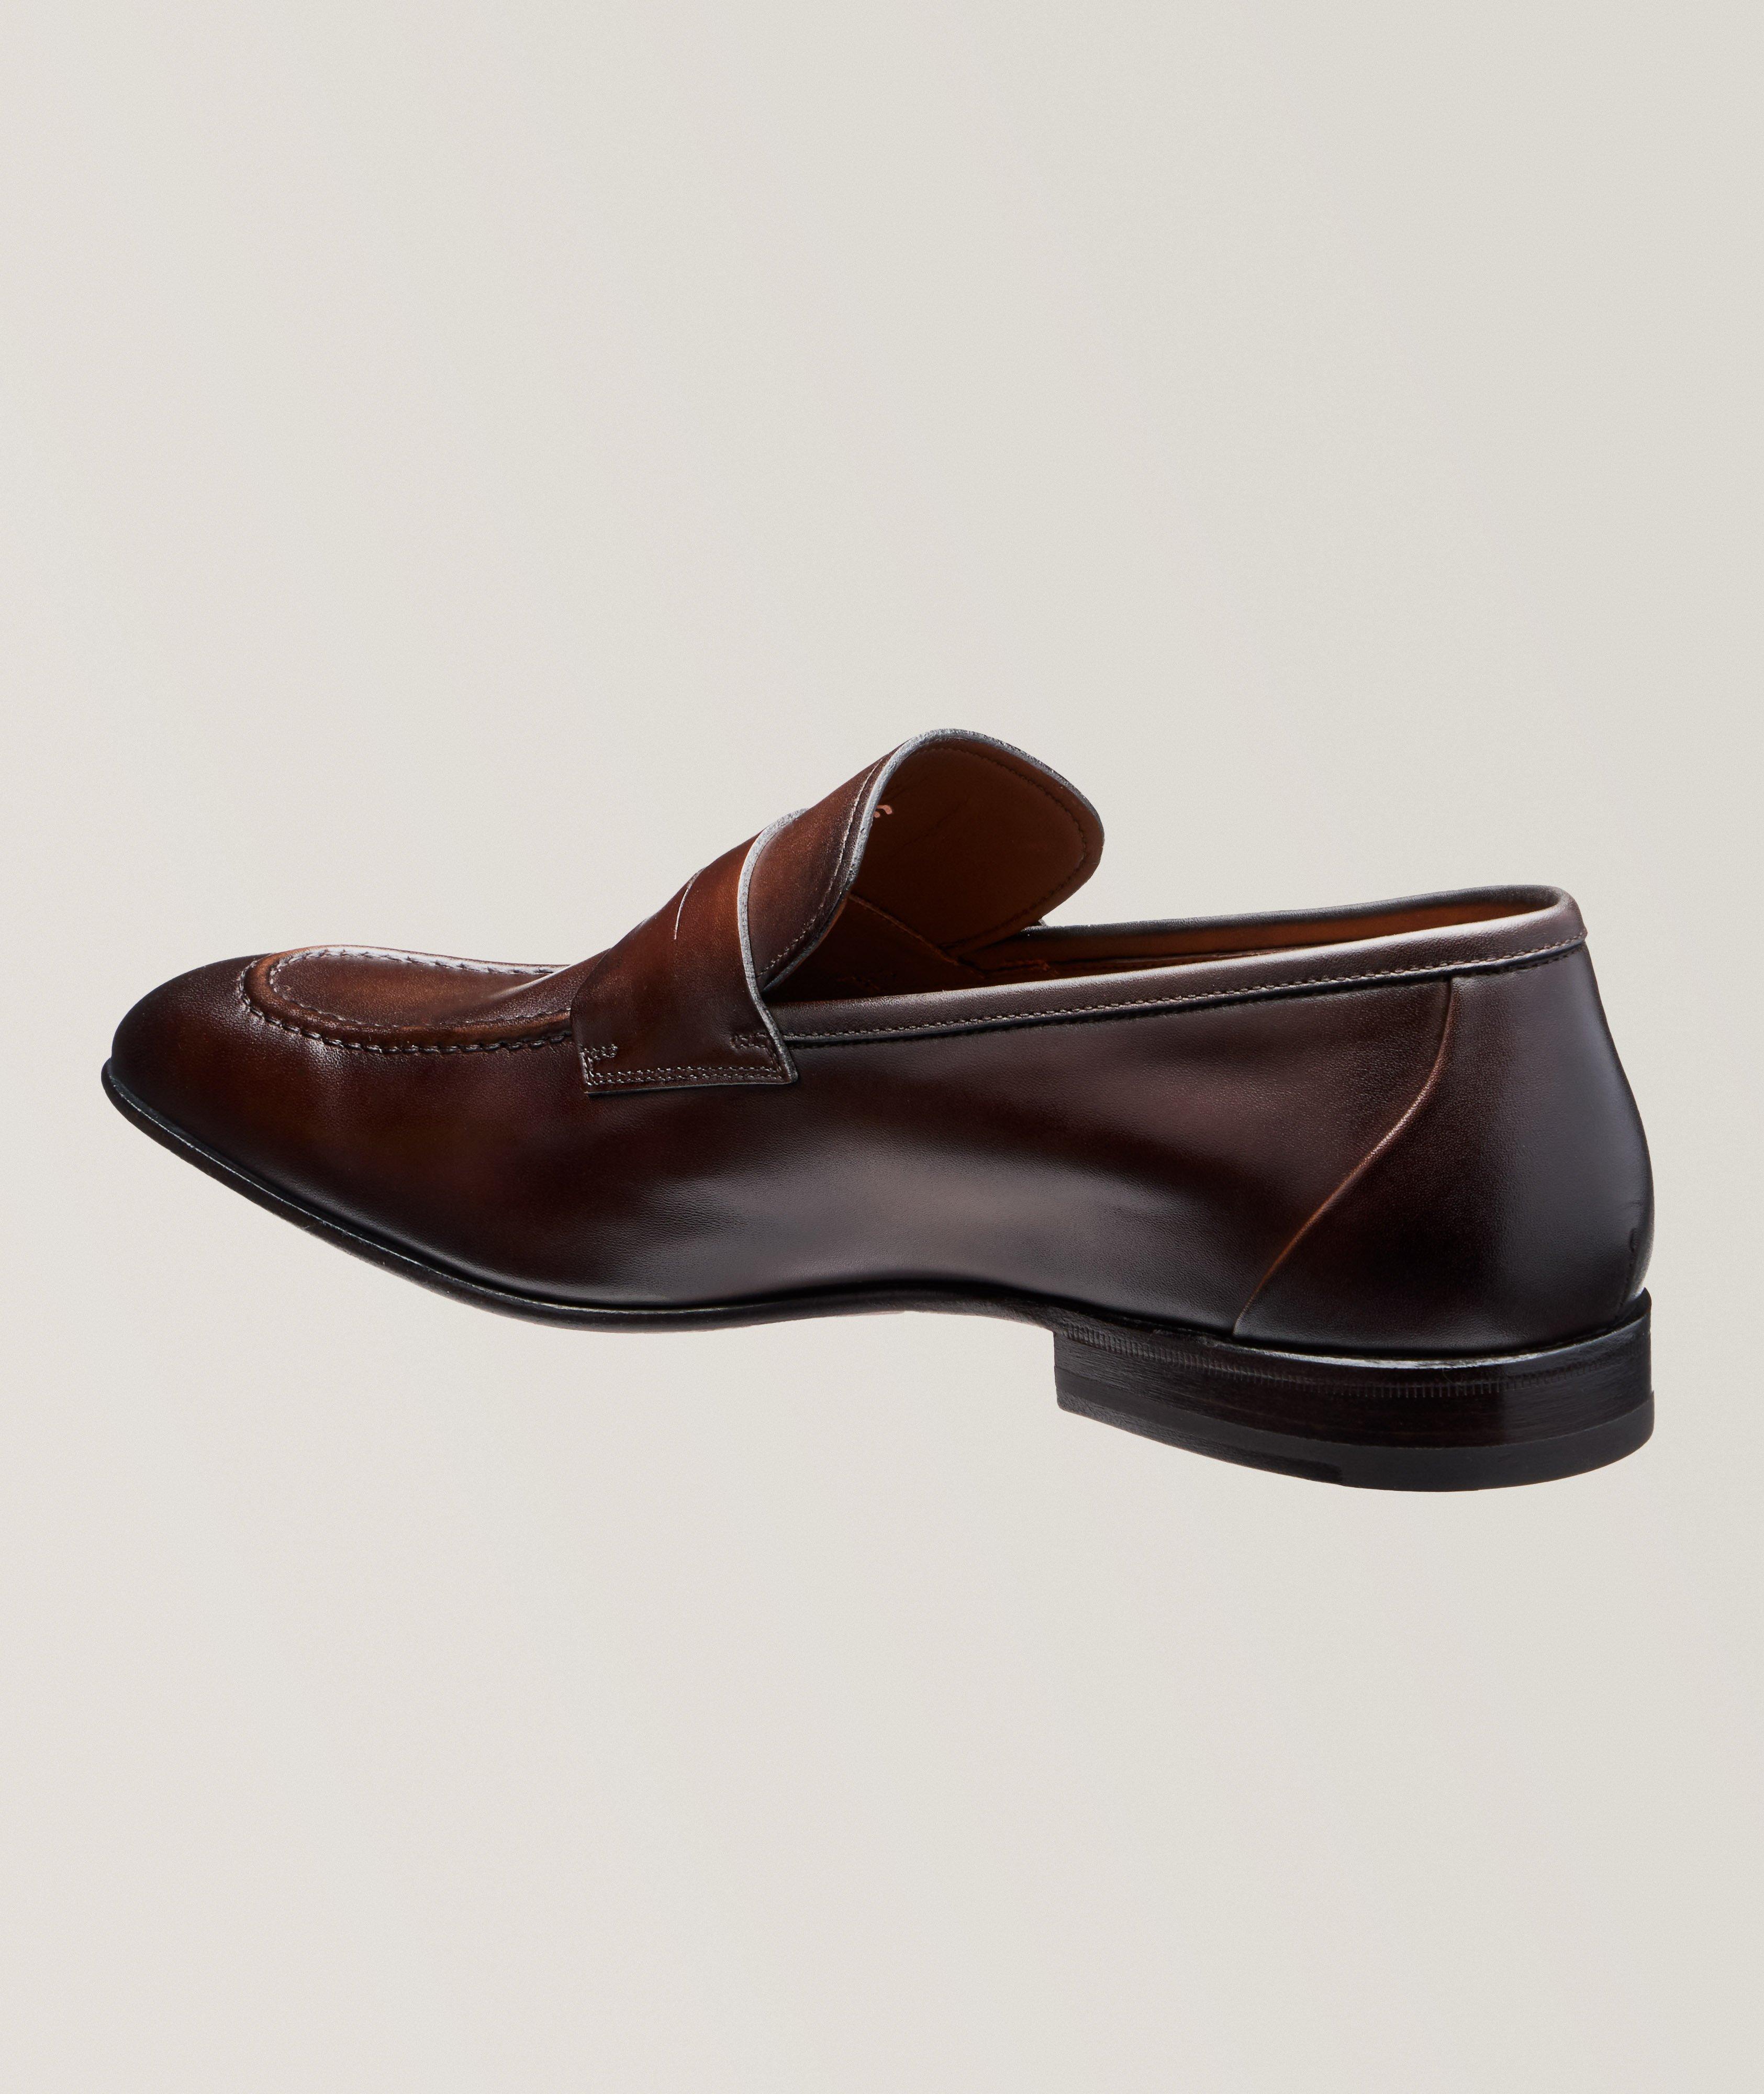 Gannon Leather Loafers image 1